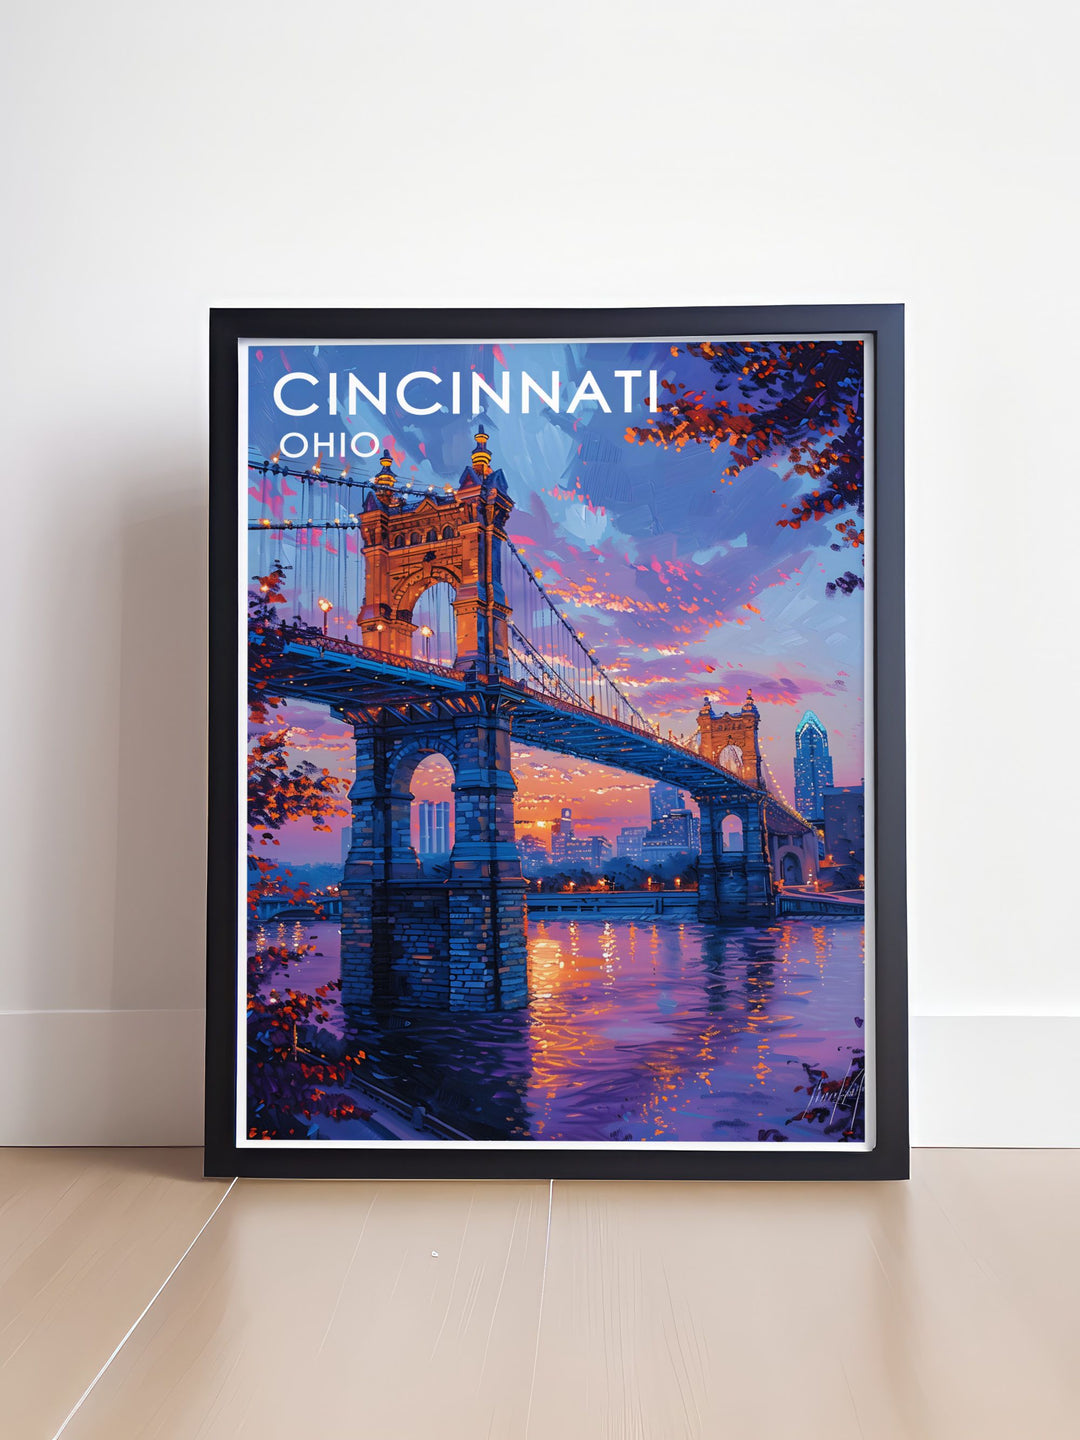 Capture the essence of Cincinnati with this travel print, featuring the Roebling Suspension Bridges elegant span across the Ohio River. Ideal for history and architecture enthusiasts, this piece adds a touch of sophistication to your decor.